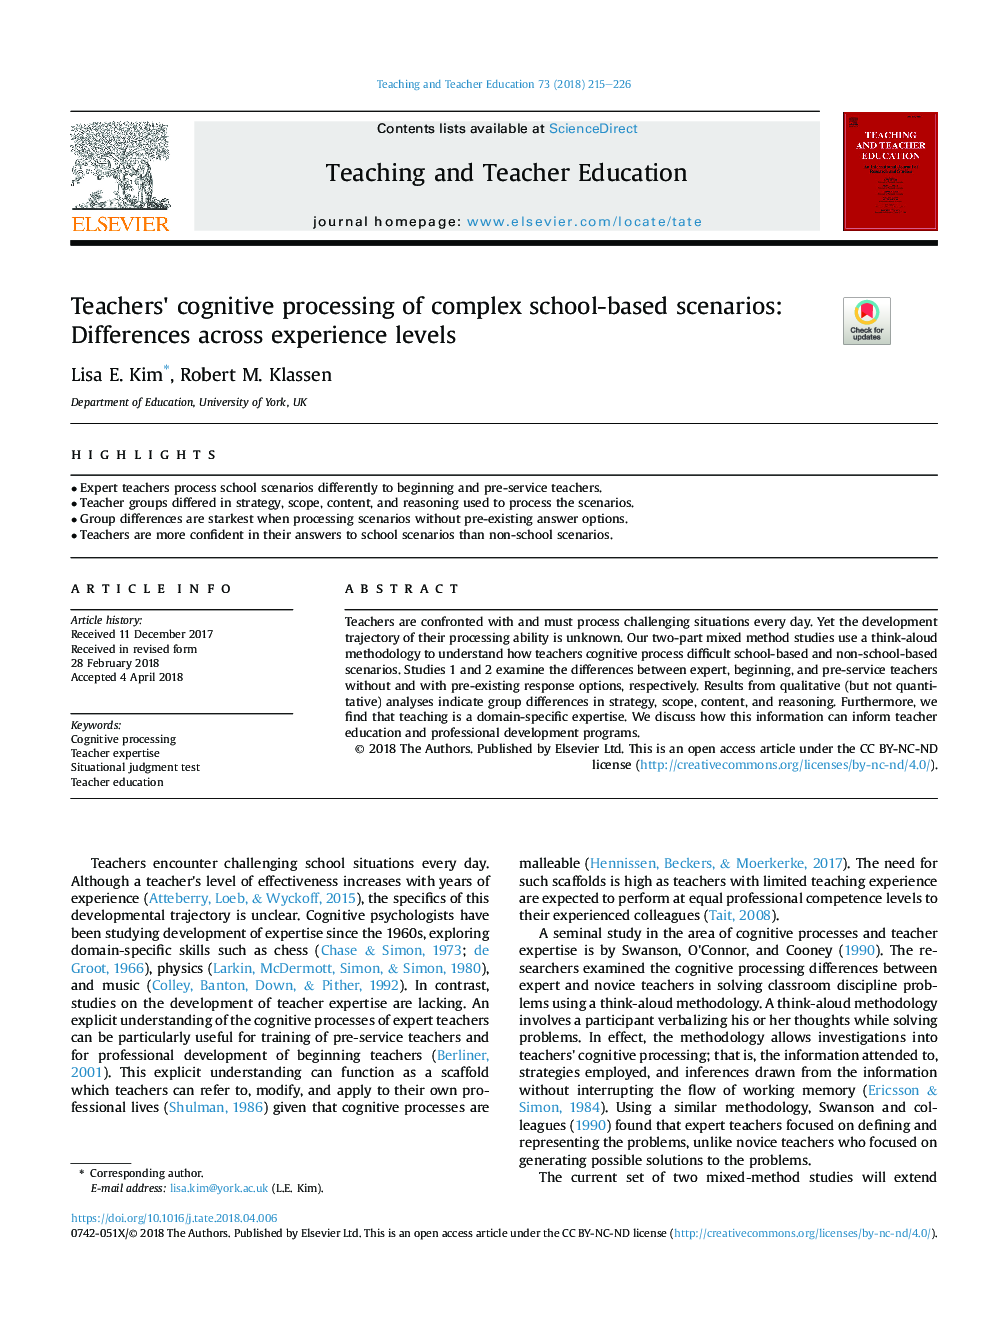 Teachers' cognitive processing of complex school-based scenarios: Differences across experience levels